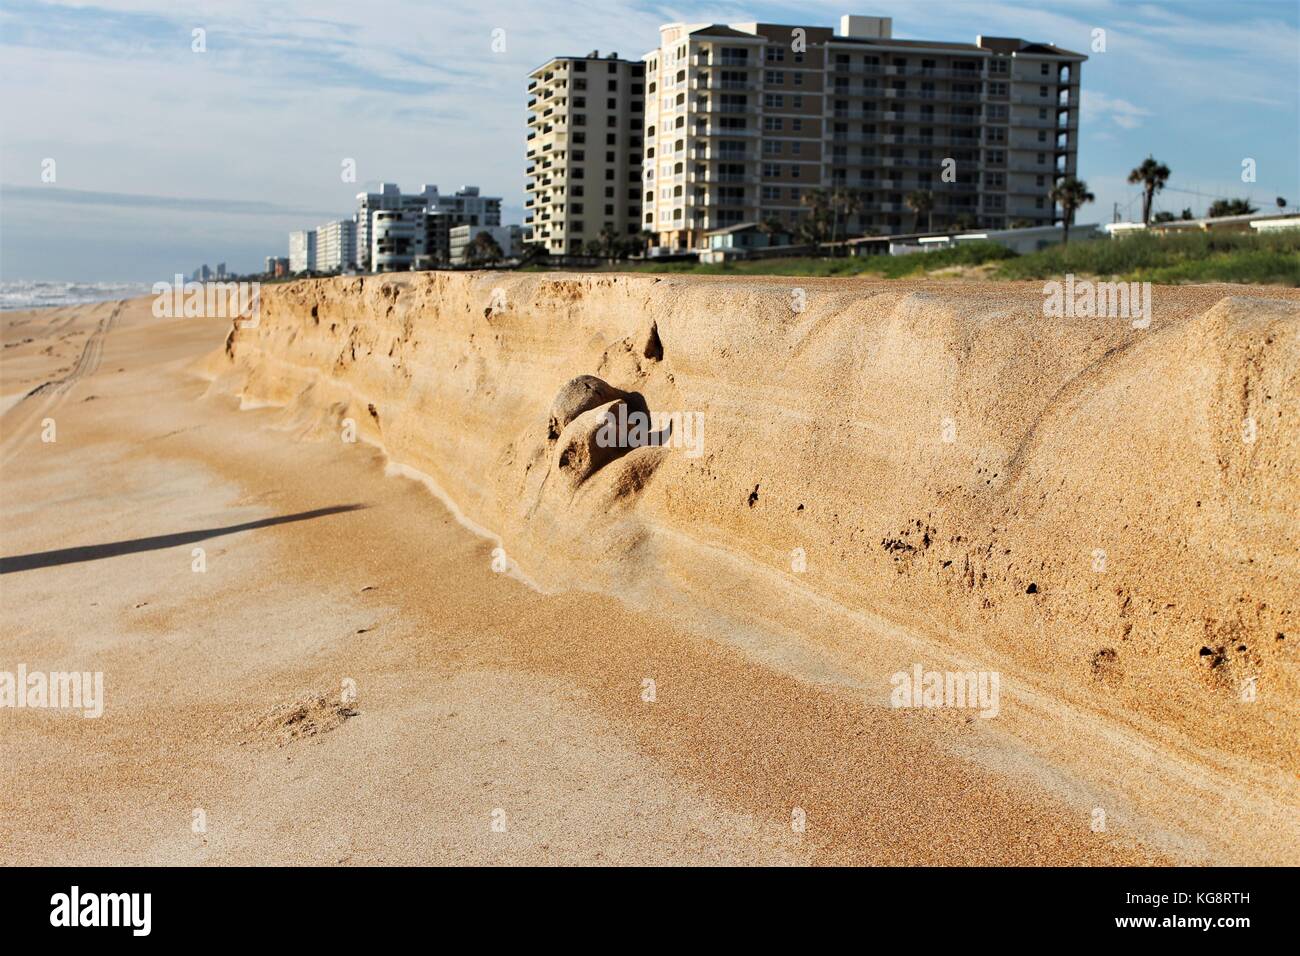 Bank of sand at the high tide line, Ormond Beach, Florida. Condo buildings in background. Stock Photo